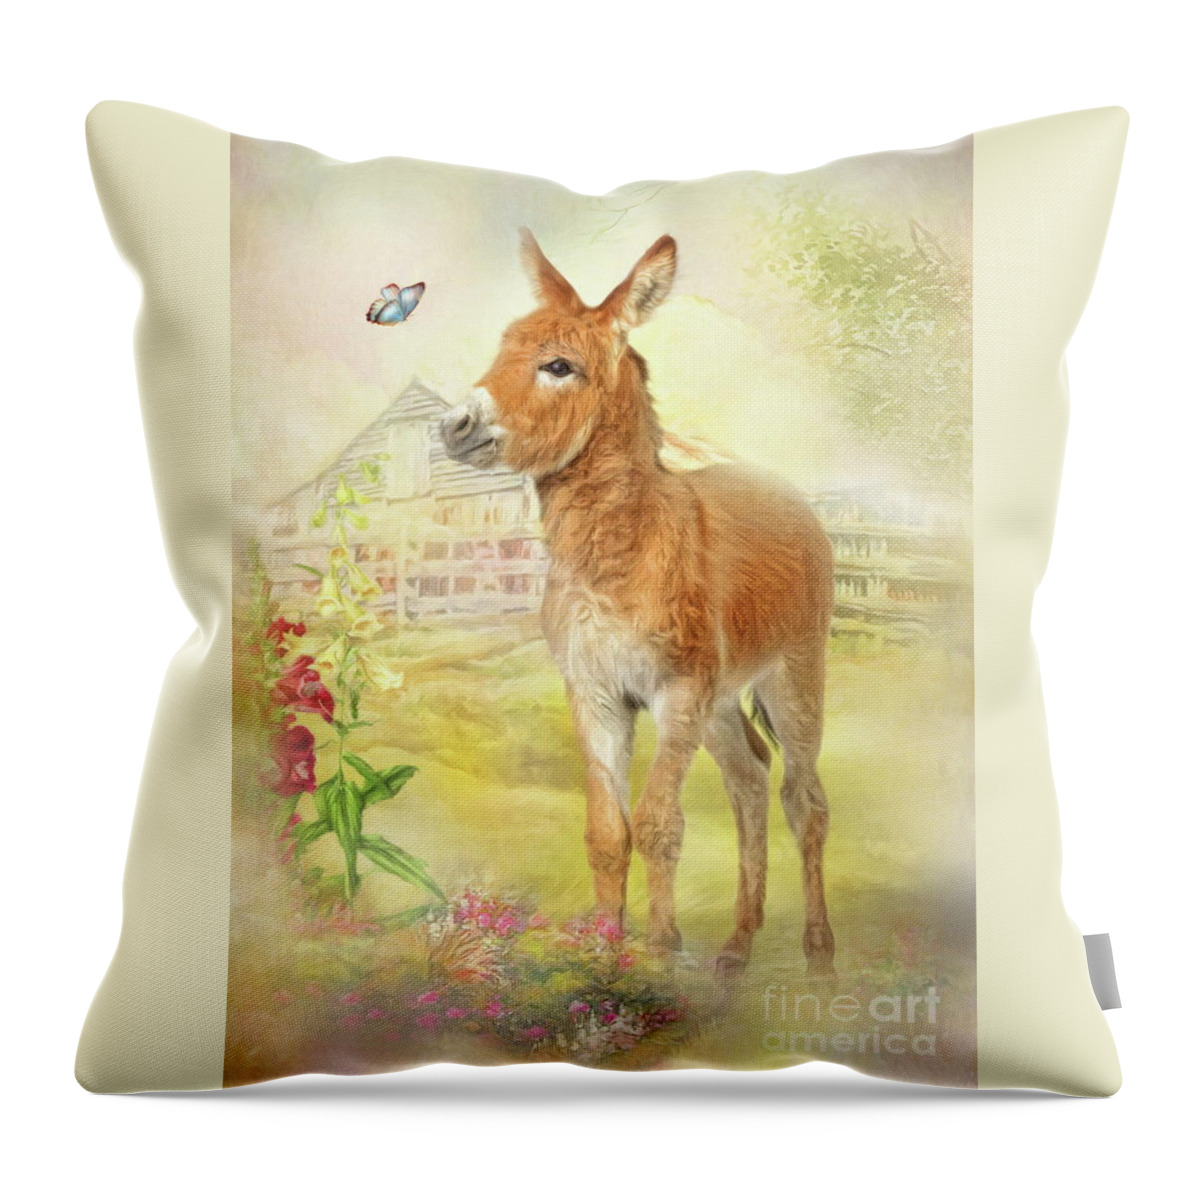 Donkey Throw Pillow featuring the digital art Little Donkey by Trudi Simmonds